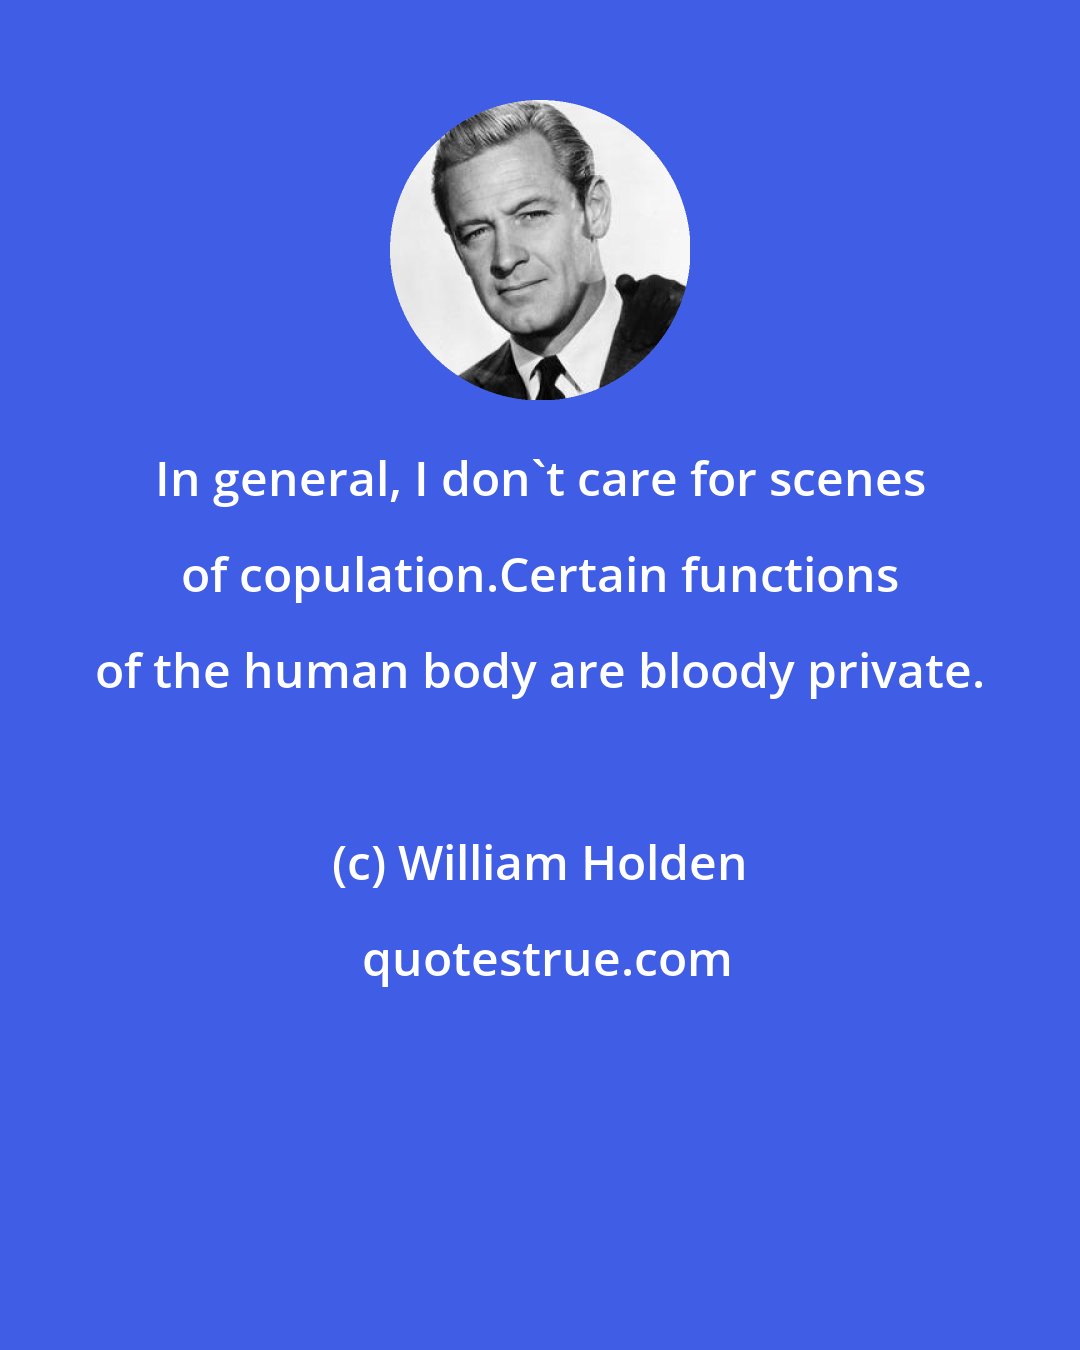 William Holden: In general, I don't care for scenes of copulation.Certain functions of the human body are bloody private.